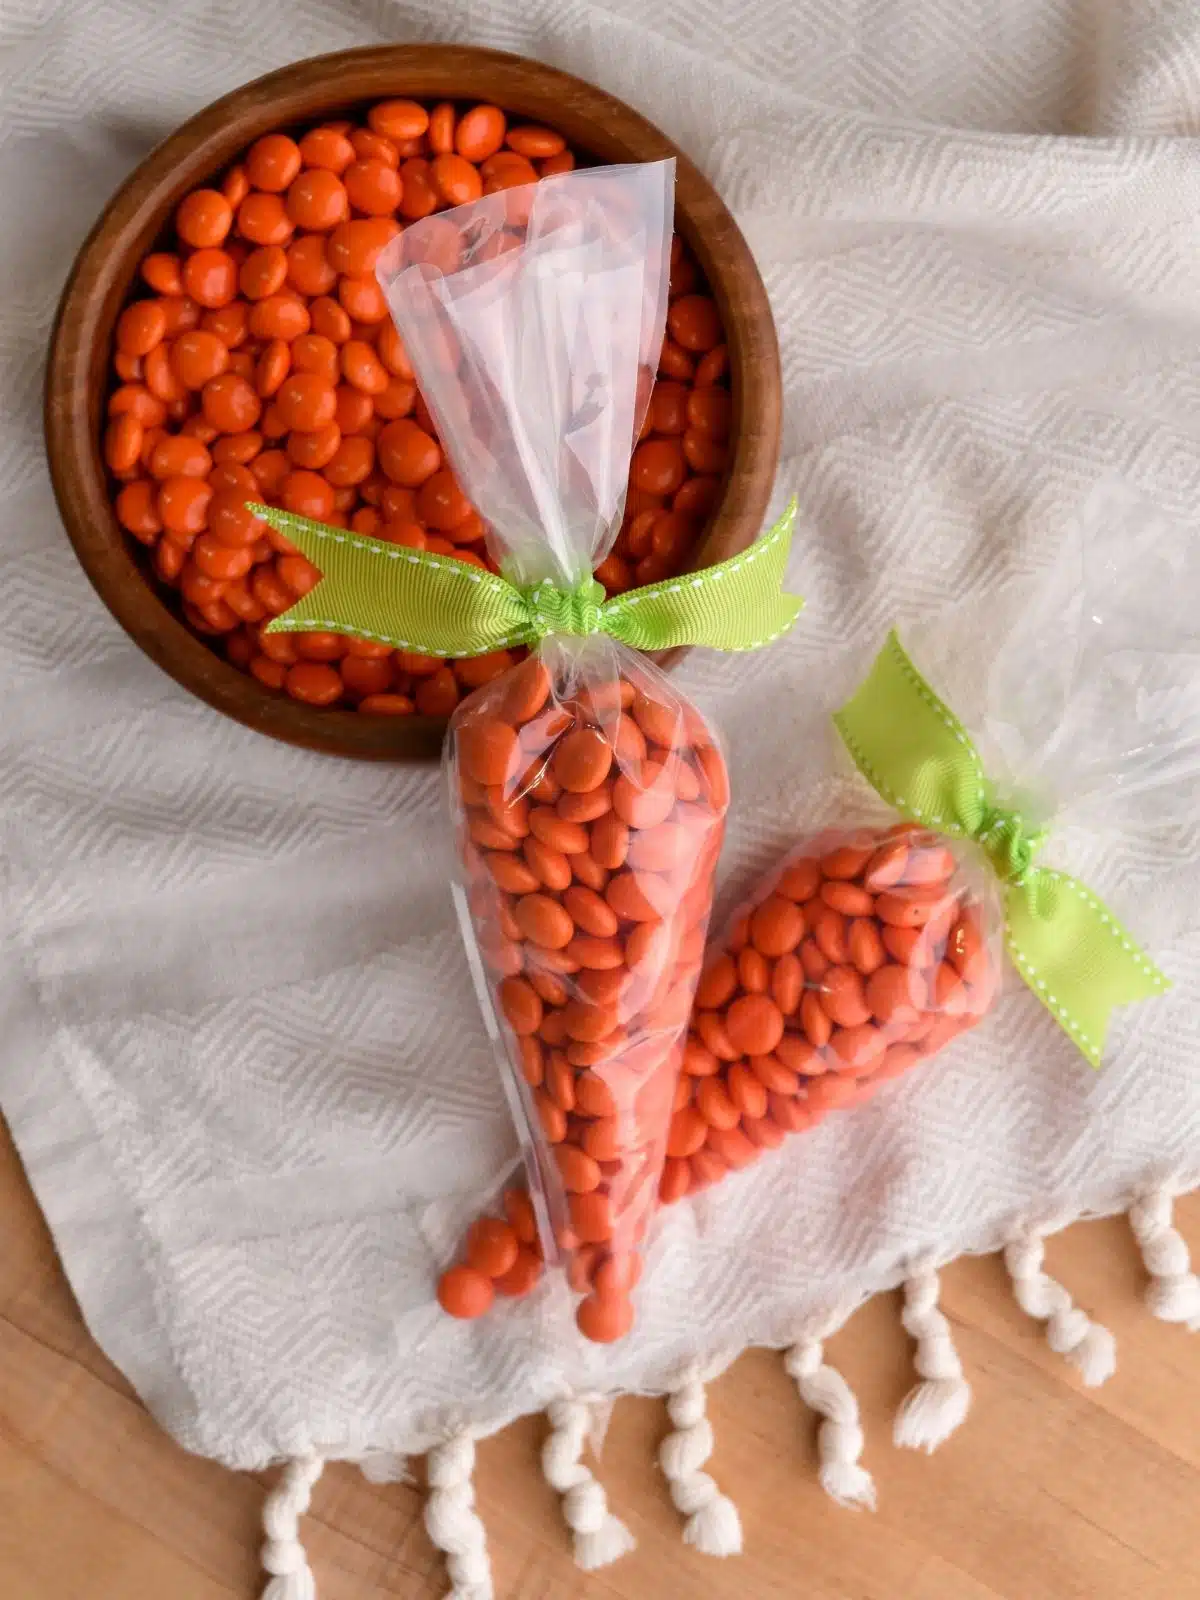 no bake treats in cellophane bags tied with ribbon to look like carrots.